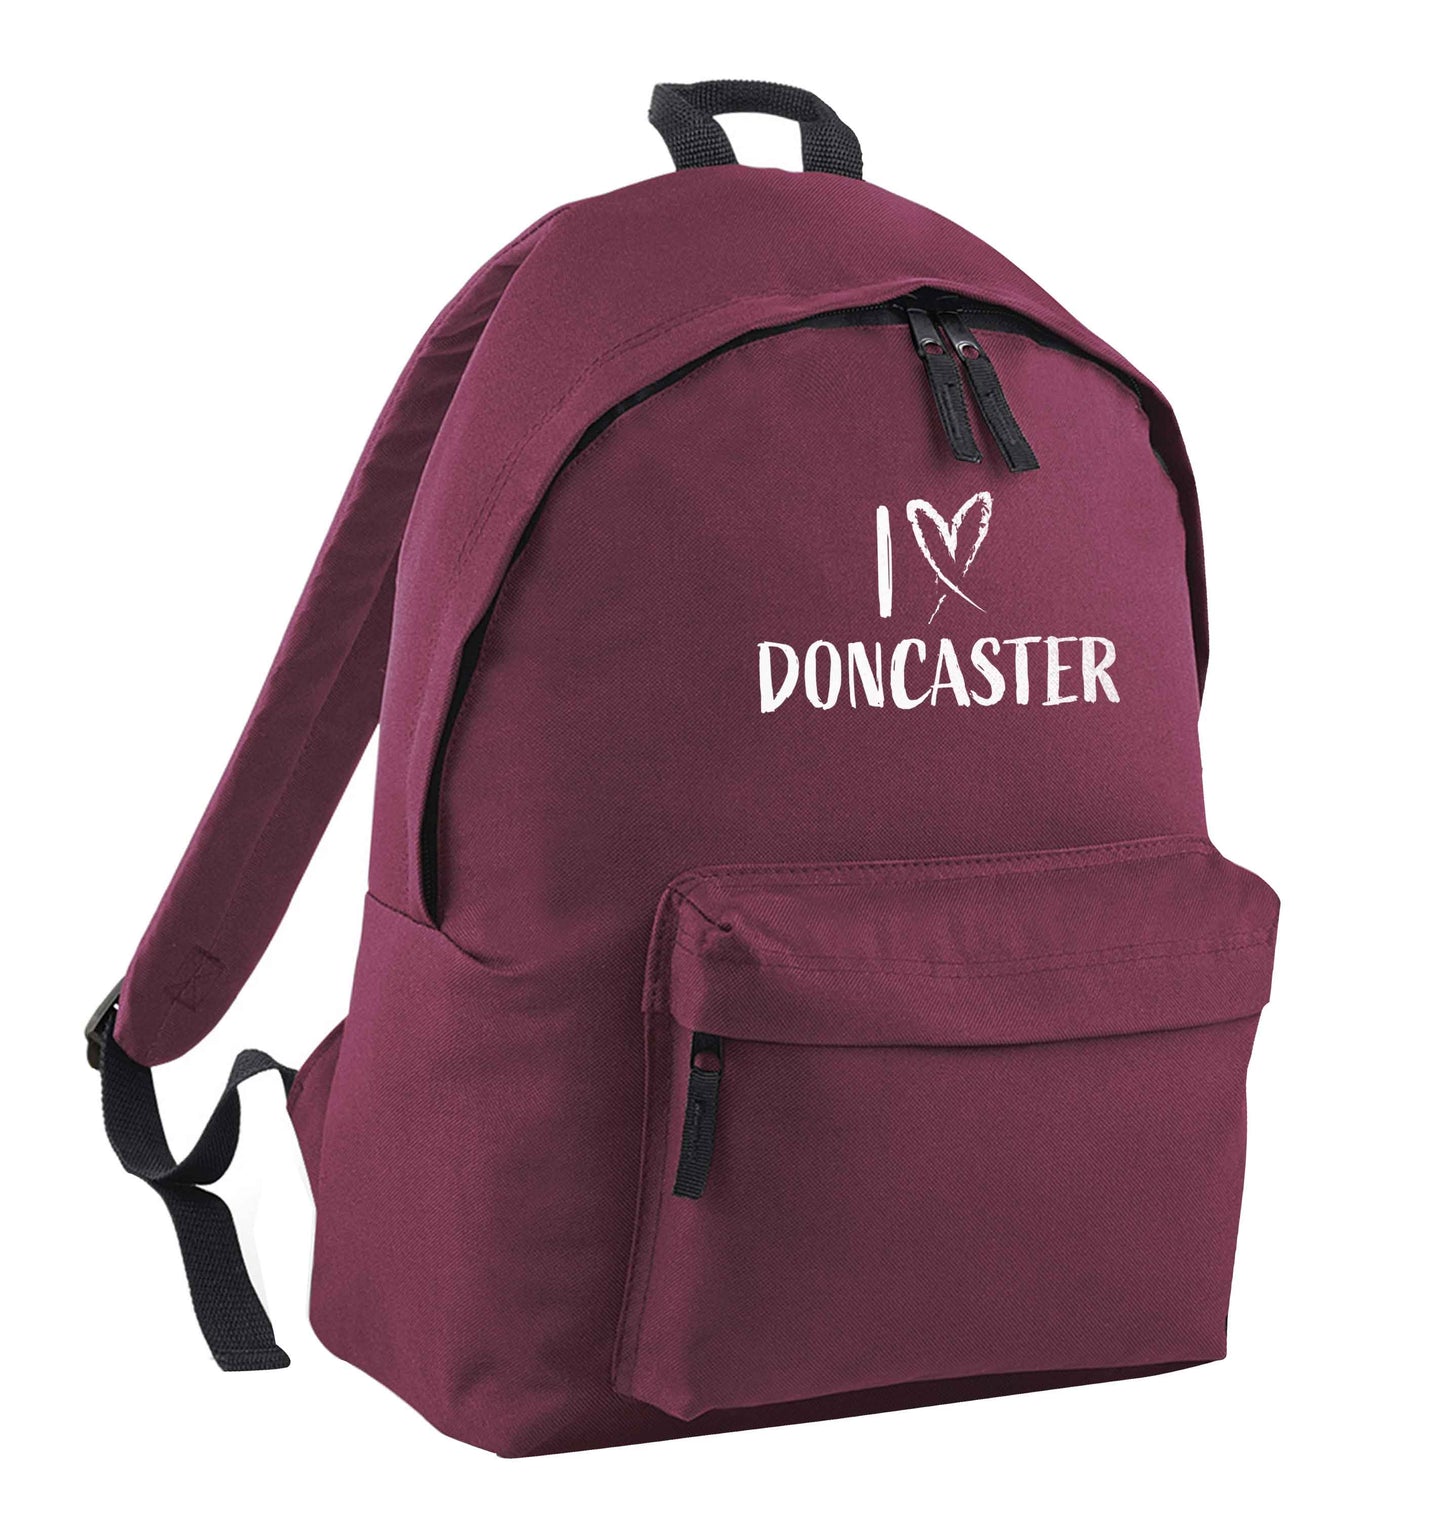 I love Doncaster maroon adults backpack